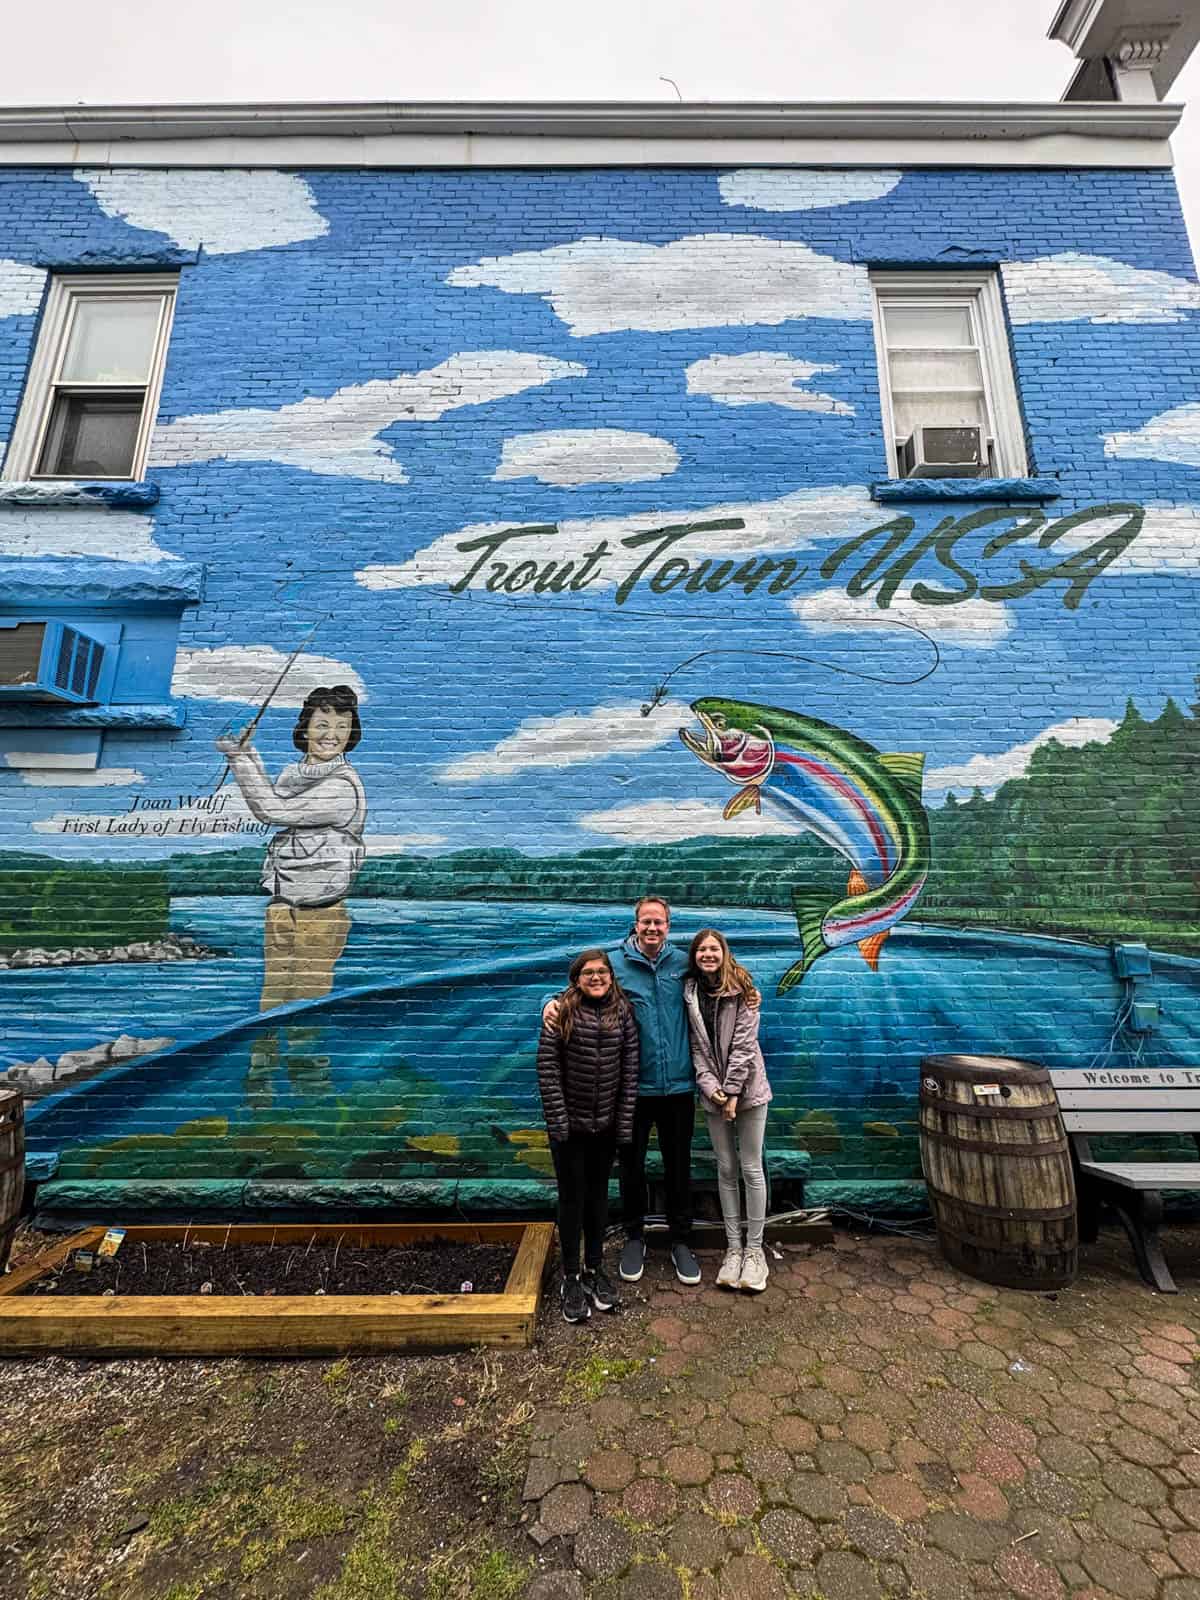 A dad and two daughters in front of a Trout Town, USA mural.